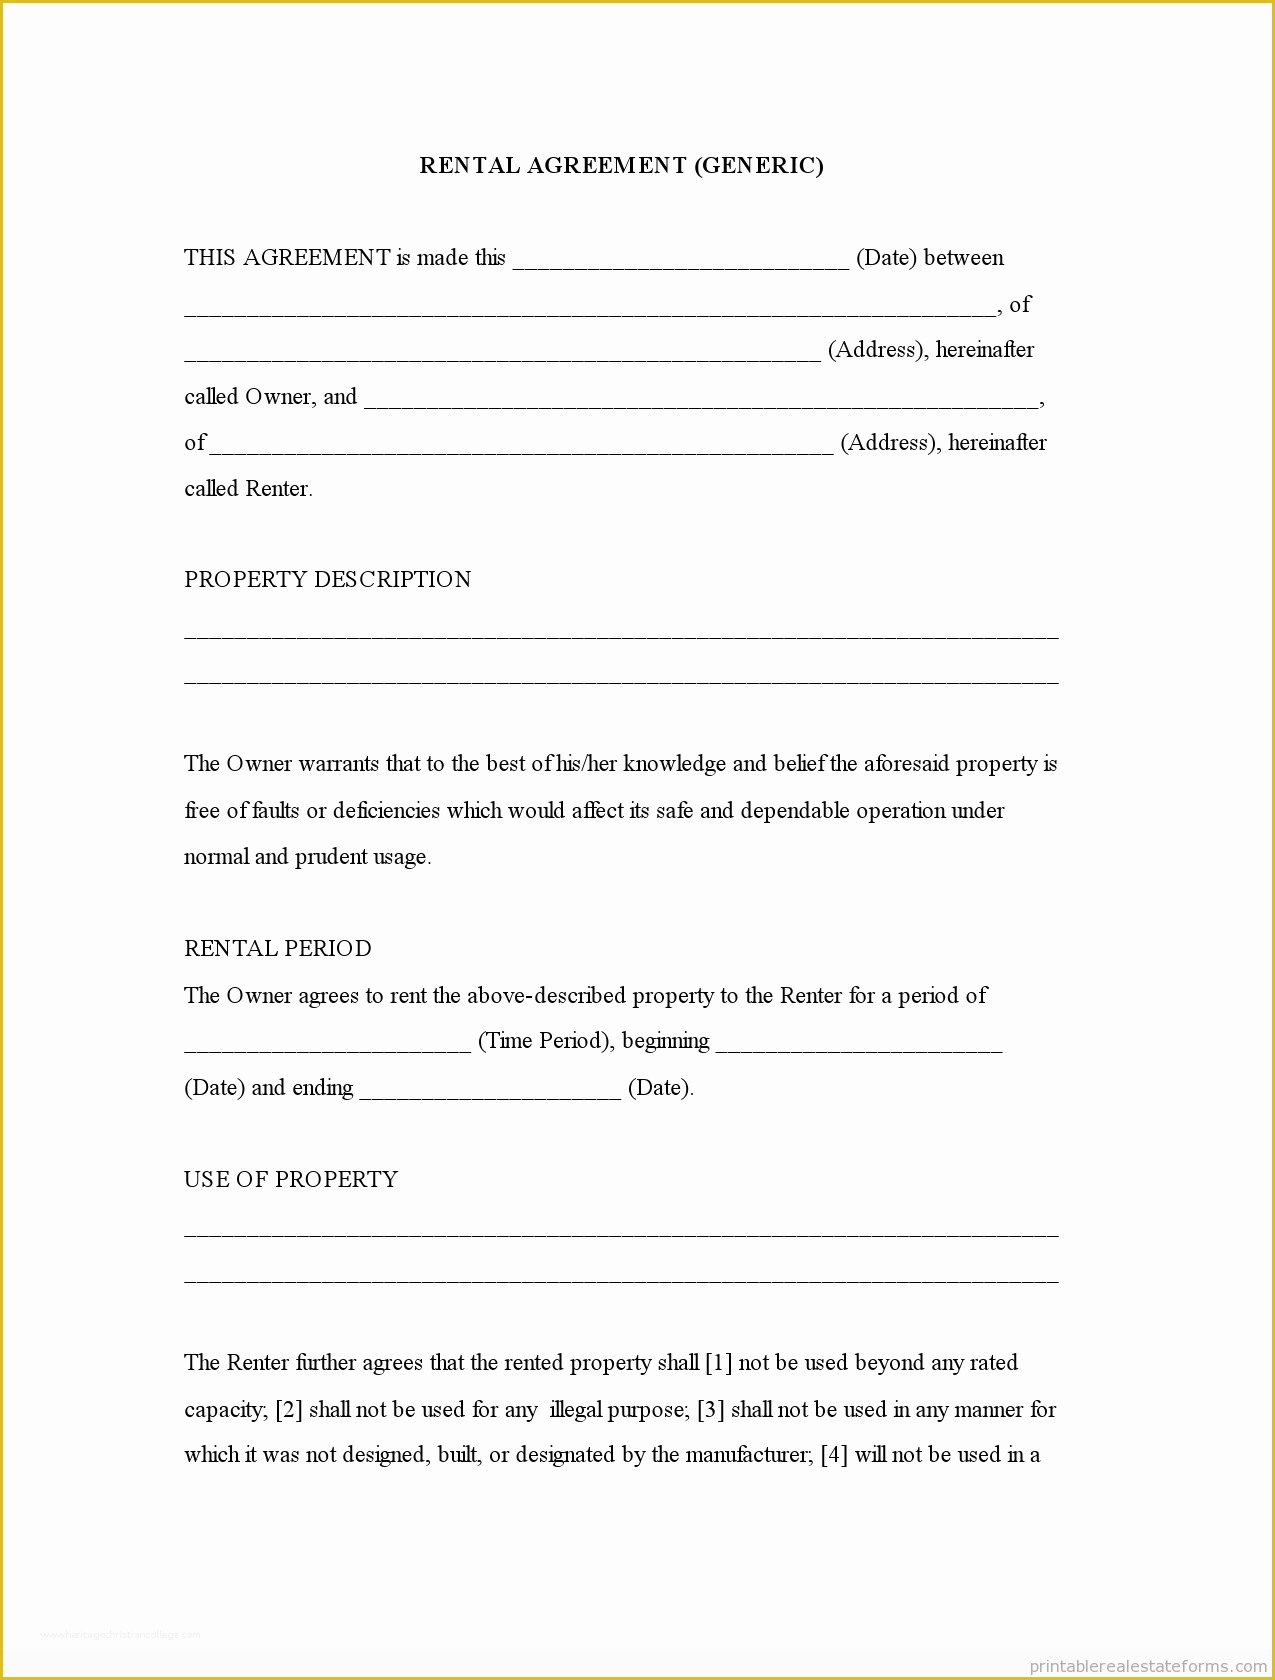 Free Rental Lease Template Of Generic Template Rental Agreement forms Free Printable